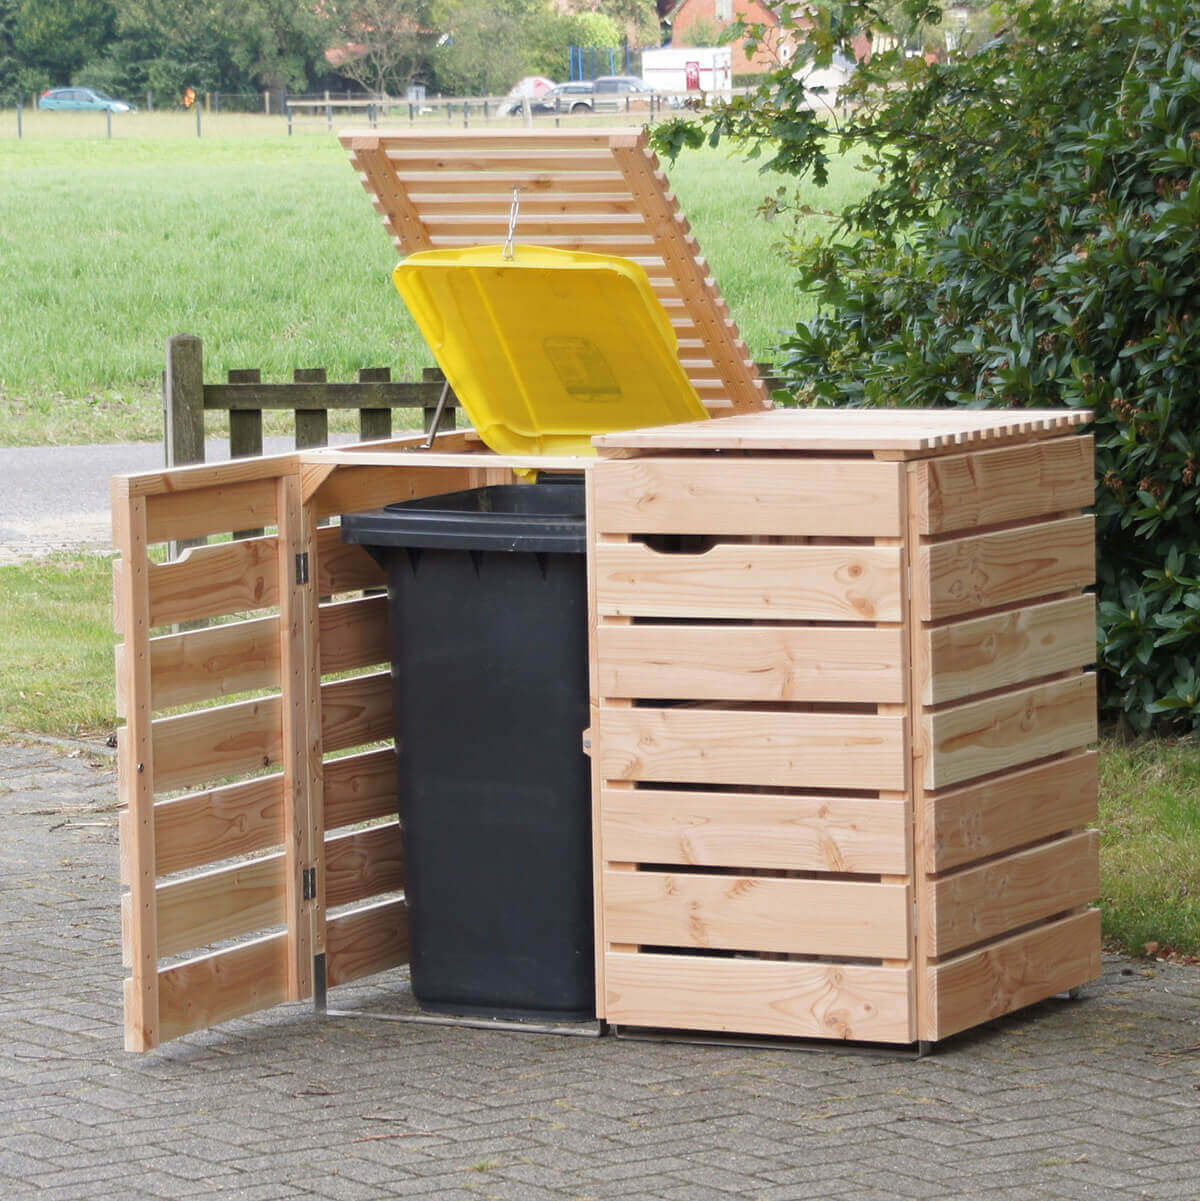 Storage to Keep Your Garbage Undercover